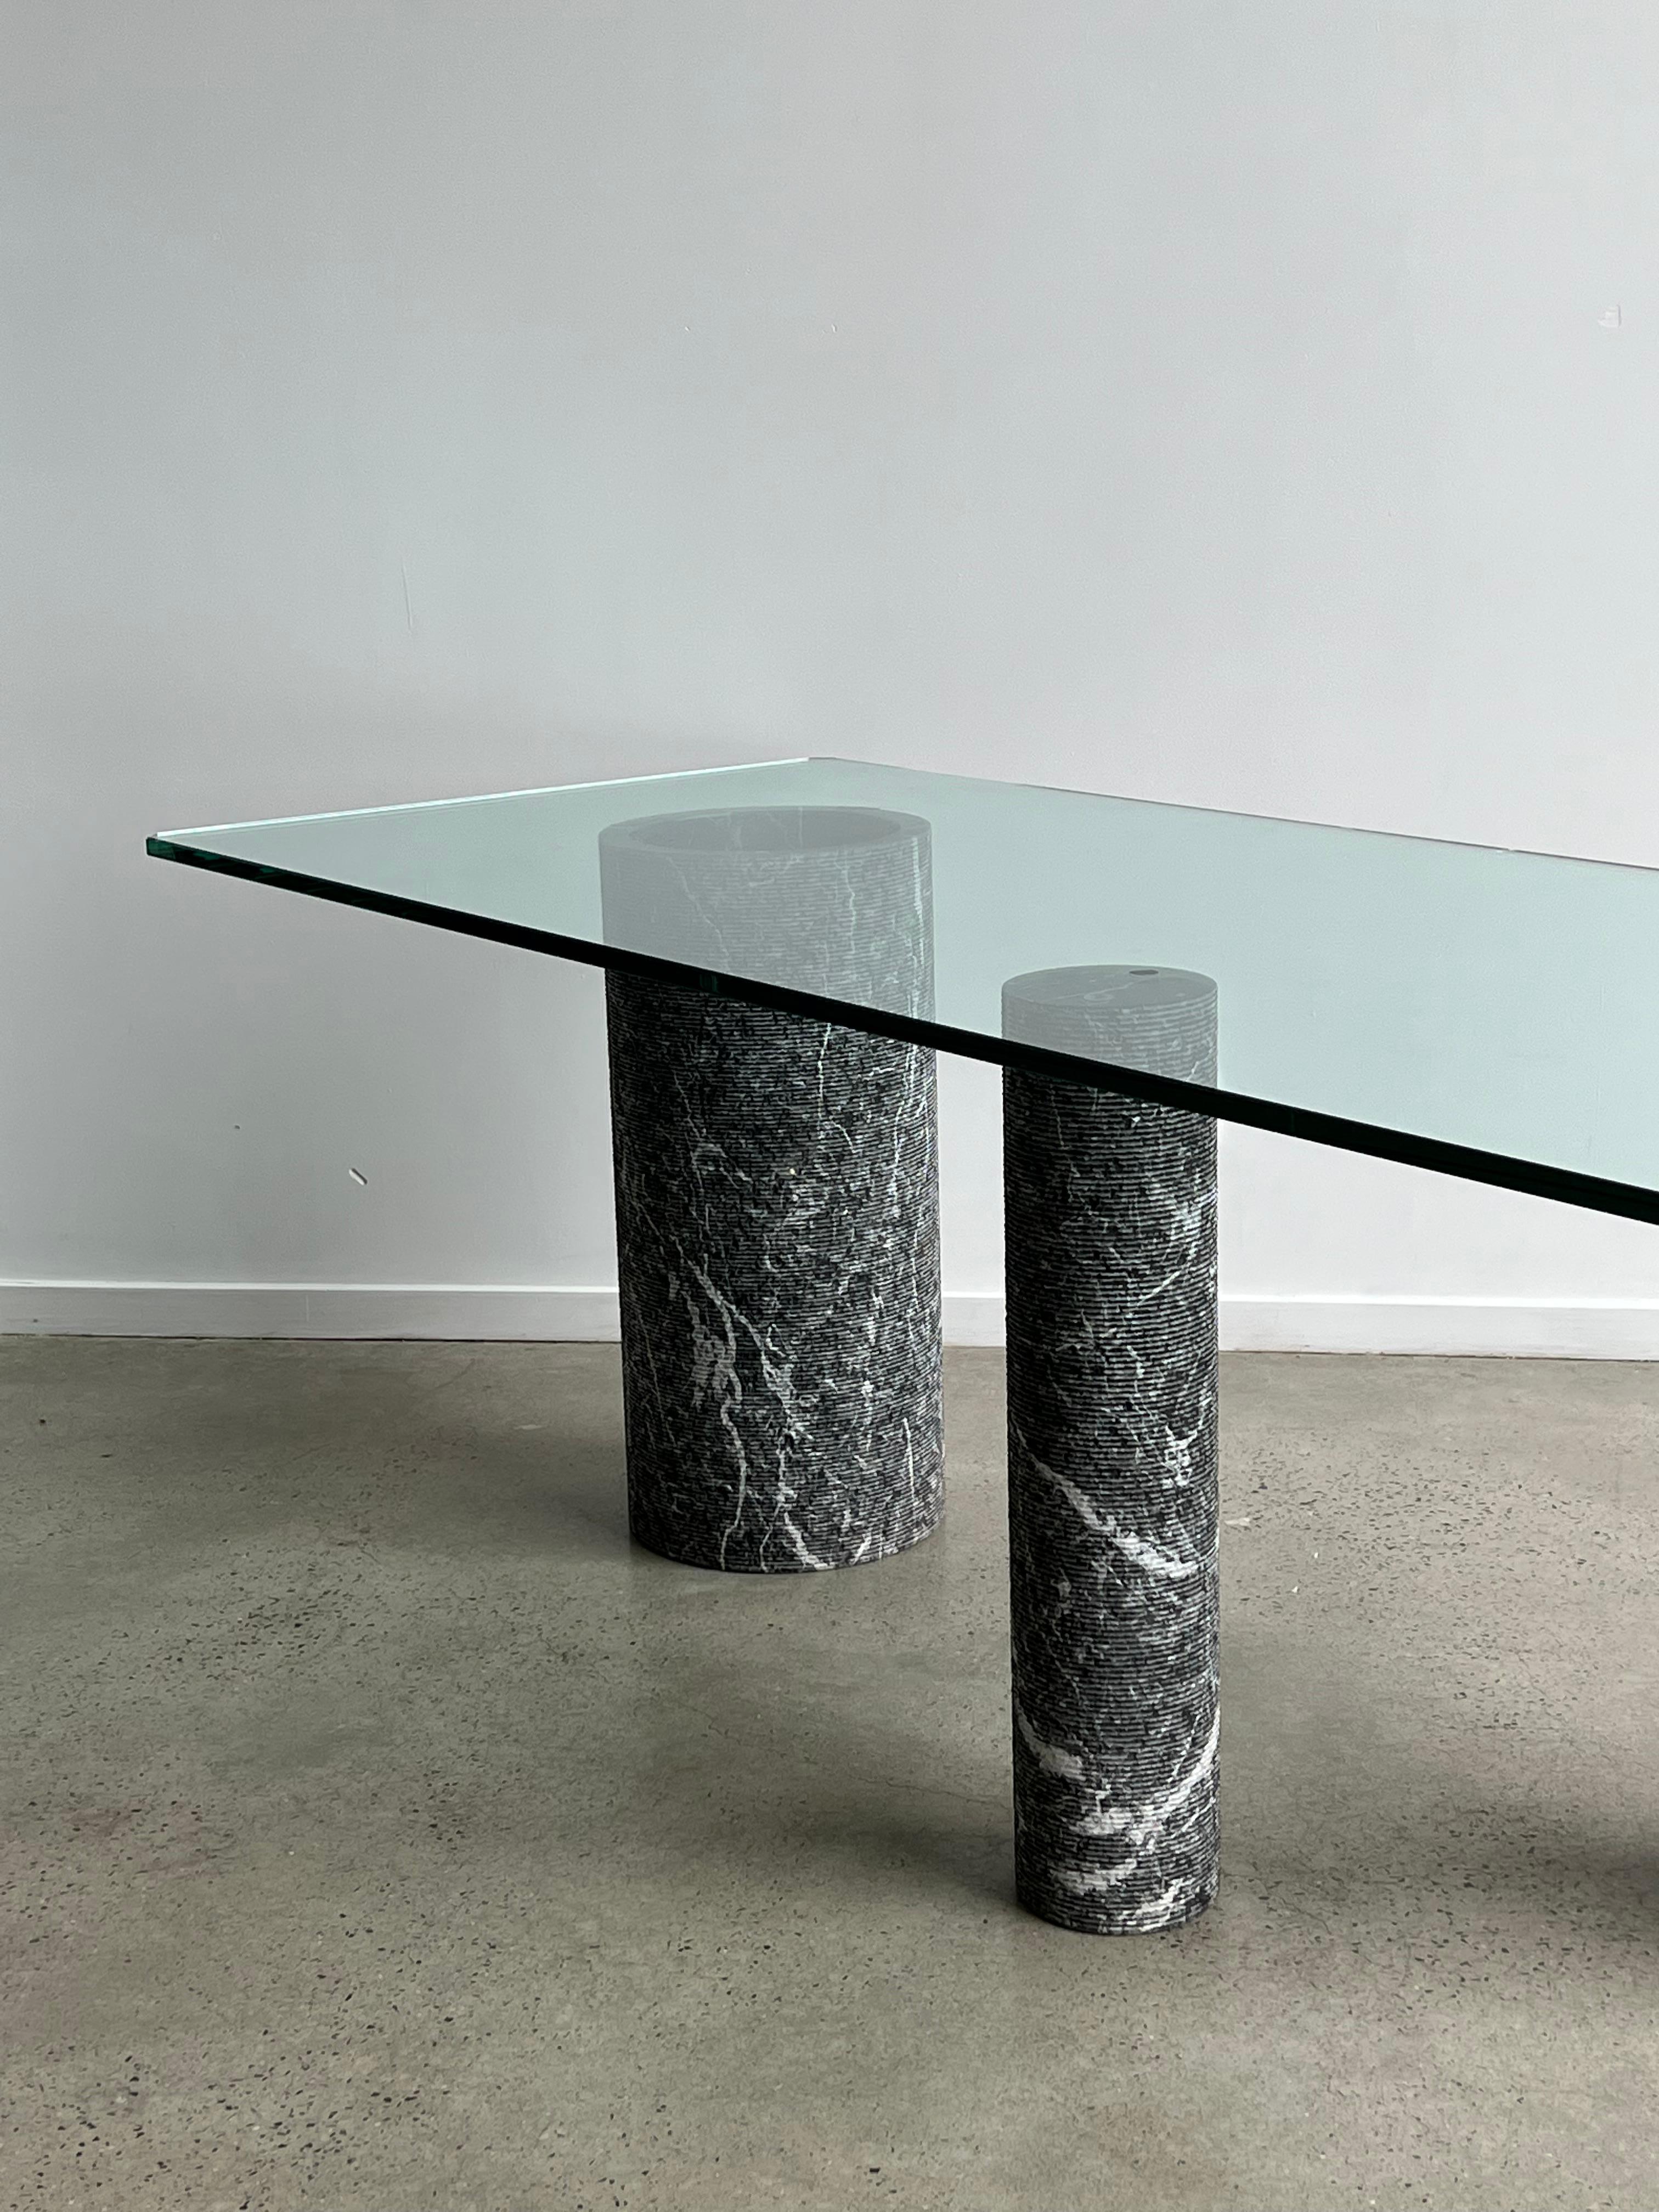 Amazing clean lines and beautiful materials used to design this stunning table in black marble and crystal glass 
Massimo Vignelli Highlight the simplicity but striking with this breathtaking pieces of art.
Design By Massimo Vignelli and